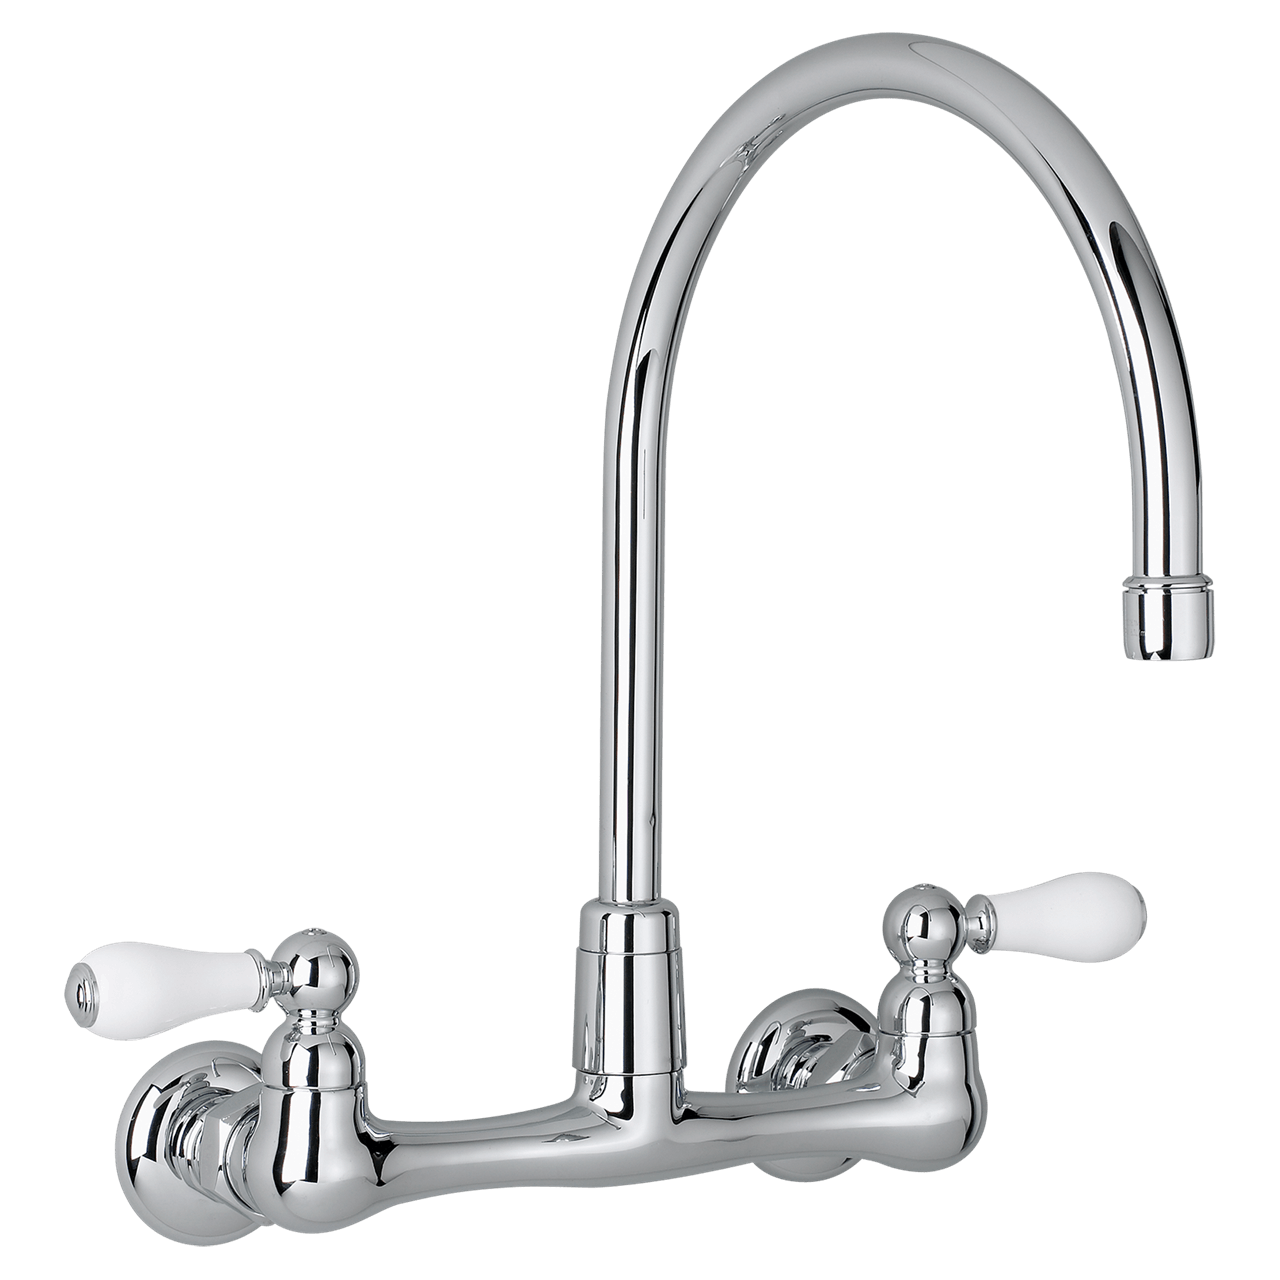 American Standard Heritage 2 Handle High Arc Wall Mount Kitchen Faucet Allied Plumbing Heating Supply Co